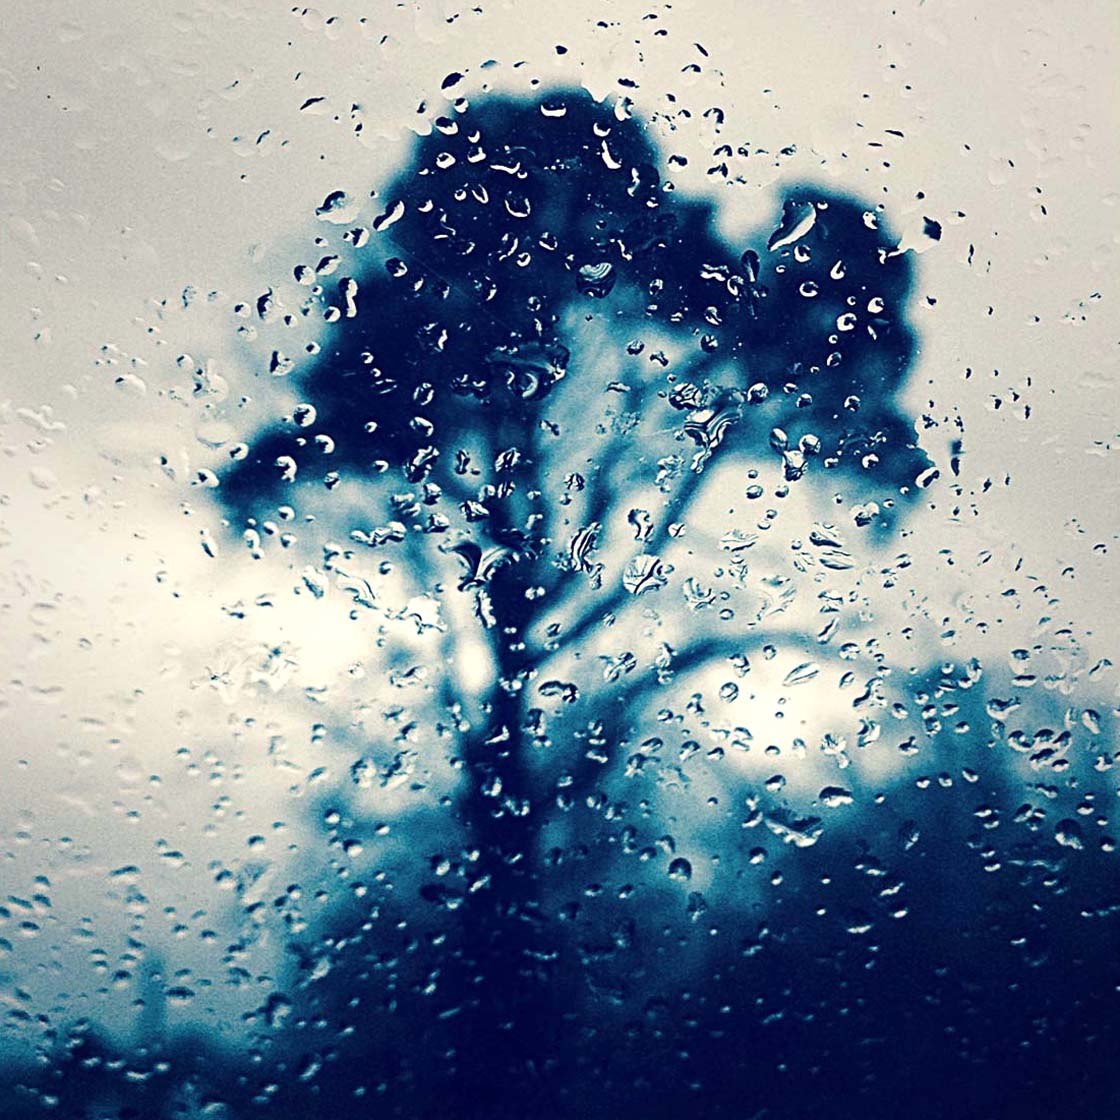 13 Creative iPhone Photography Projects For A Rainy Day